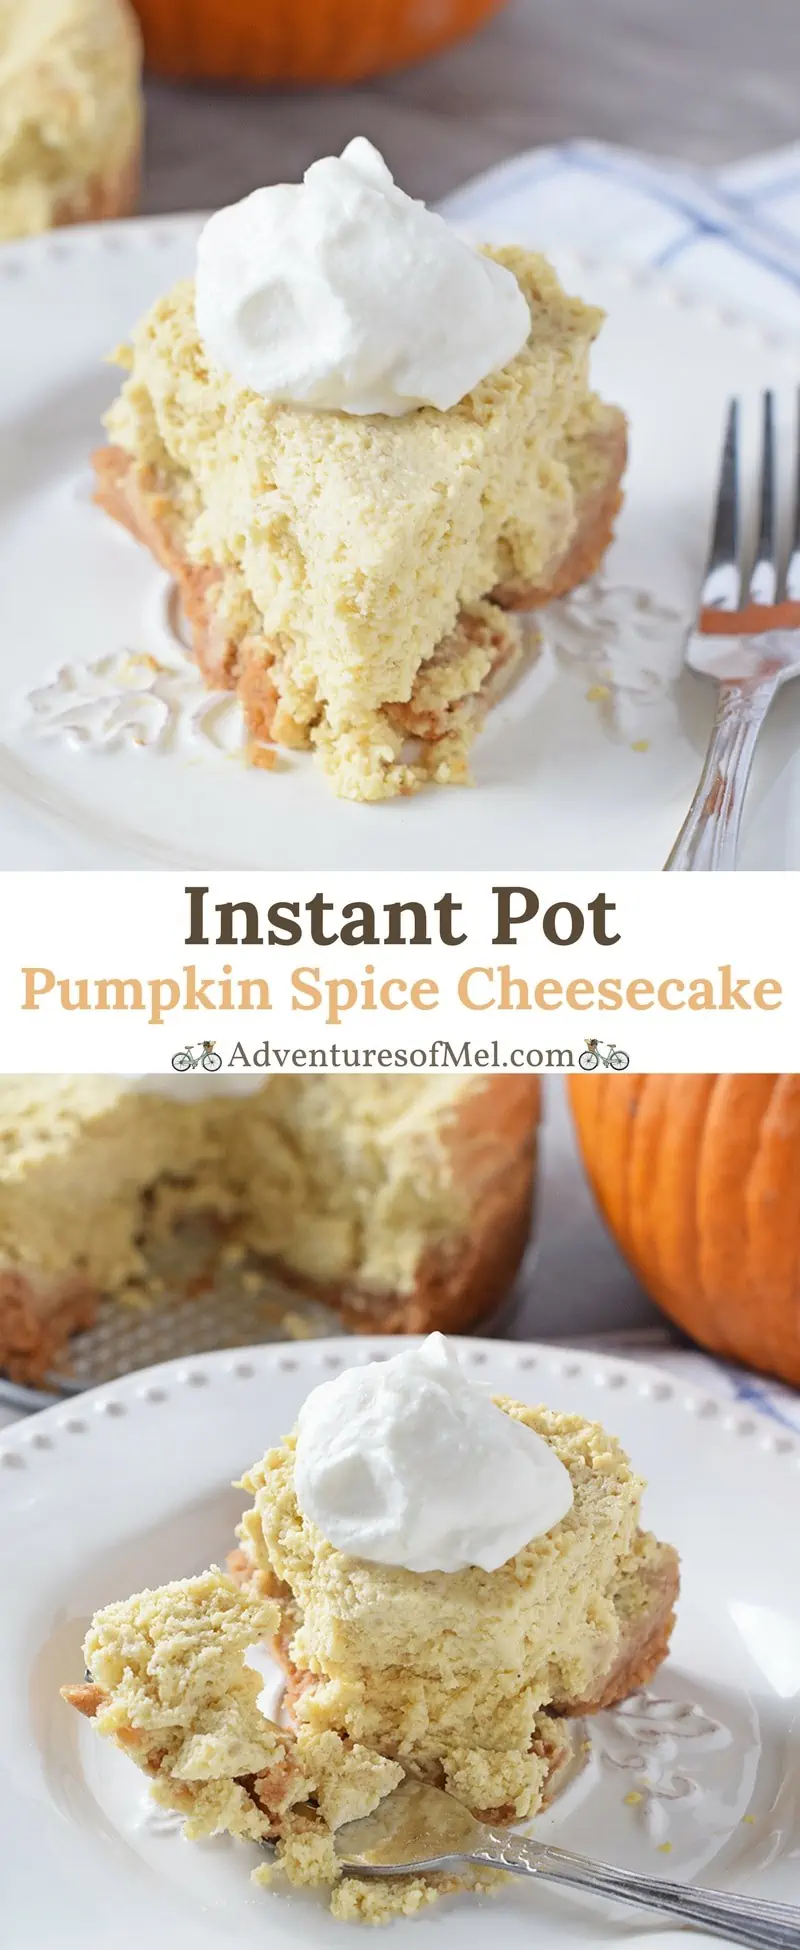 Pumpkin Spice Cheesecake, made in the Instant Pot. Easy fall and holiday dessert recipe with a graham cracker crust, full of delicious fall flavors.